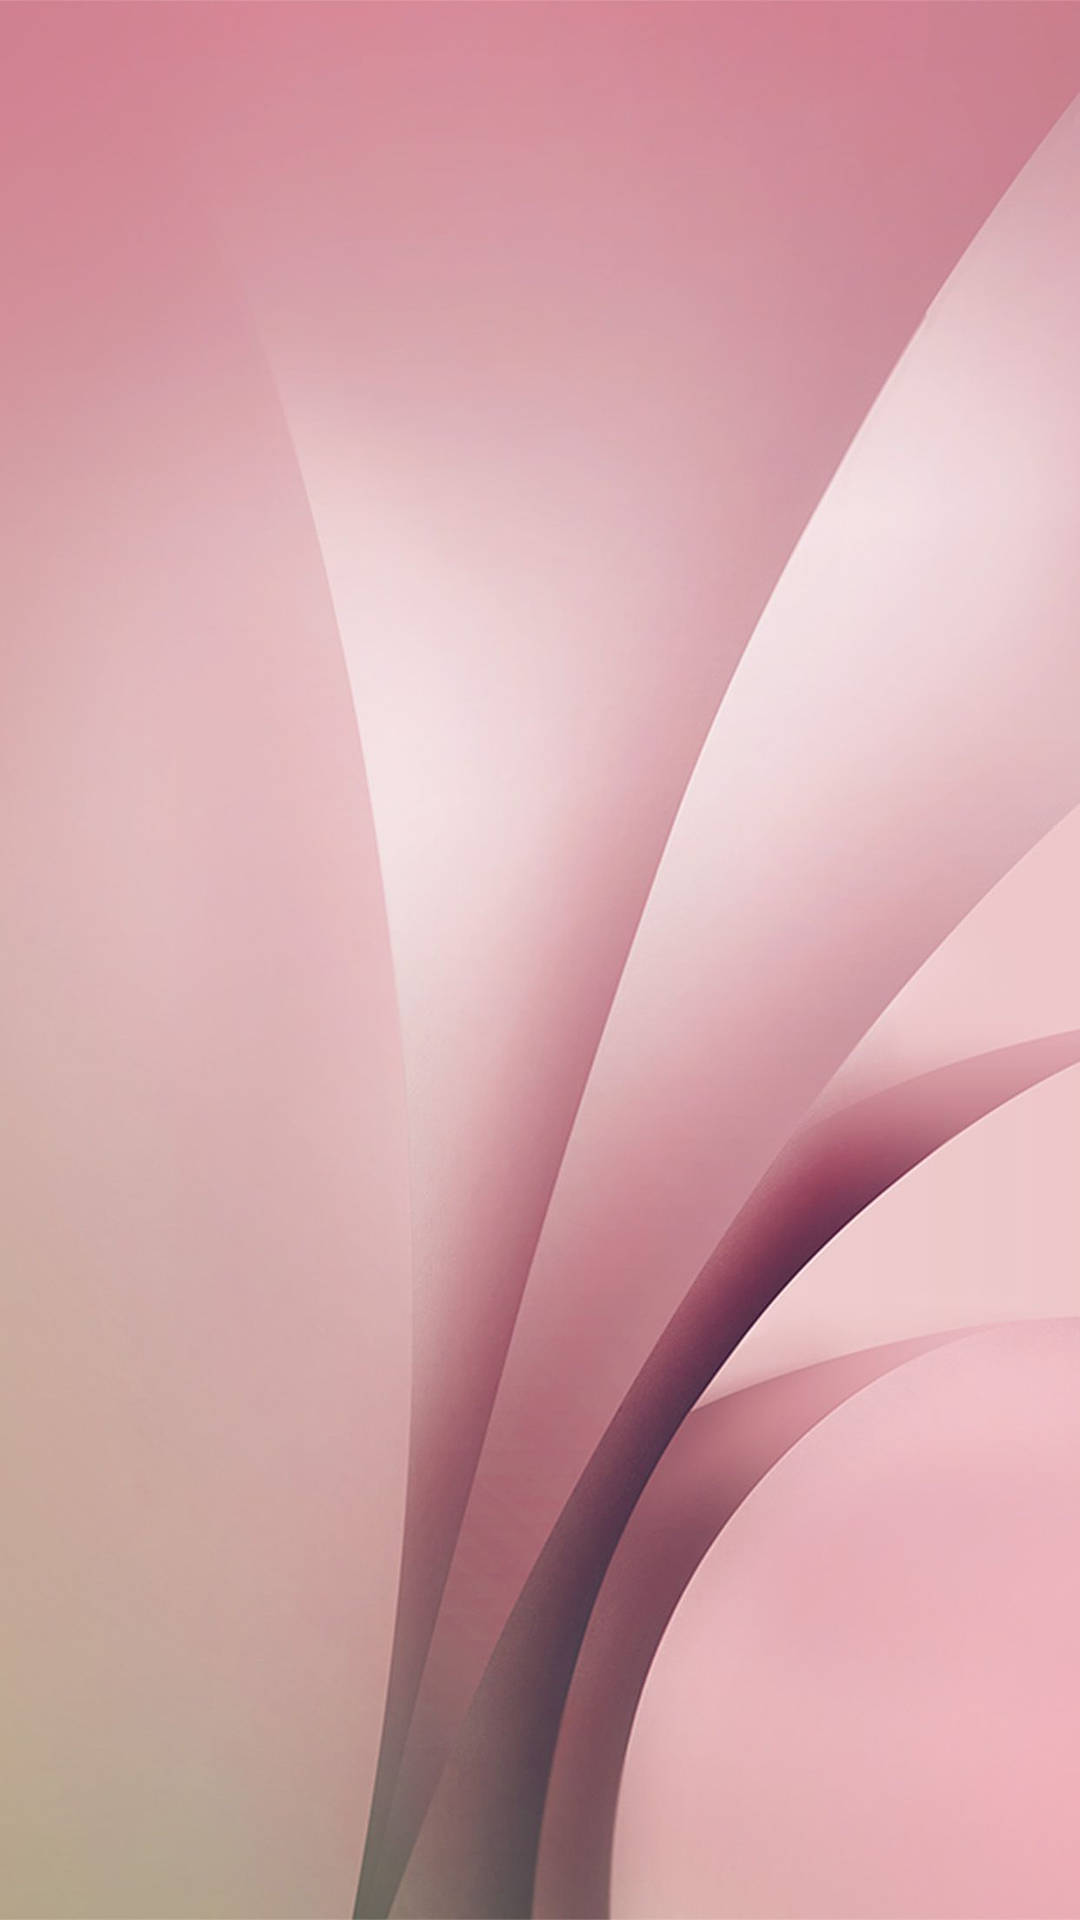 Cool Aesthetic Abstract Pink Wave Wallpaper